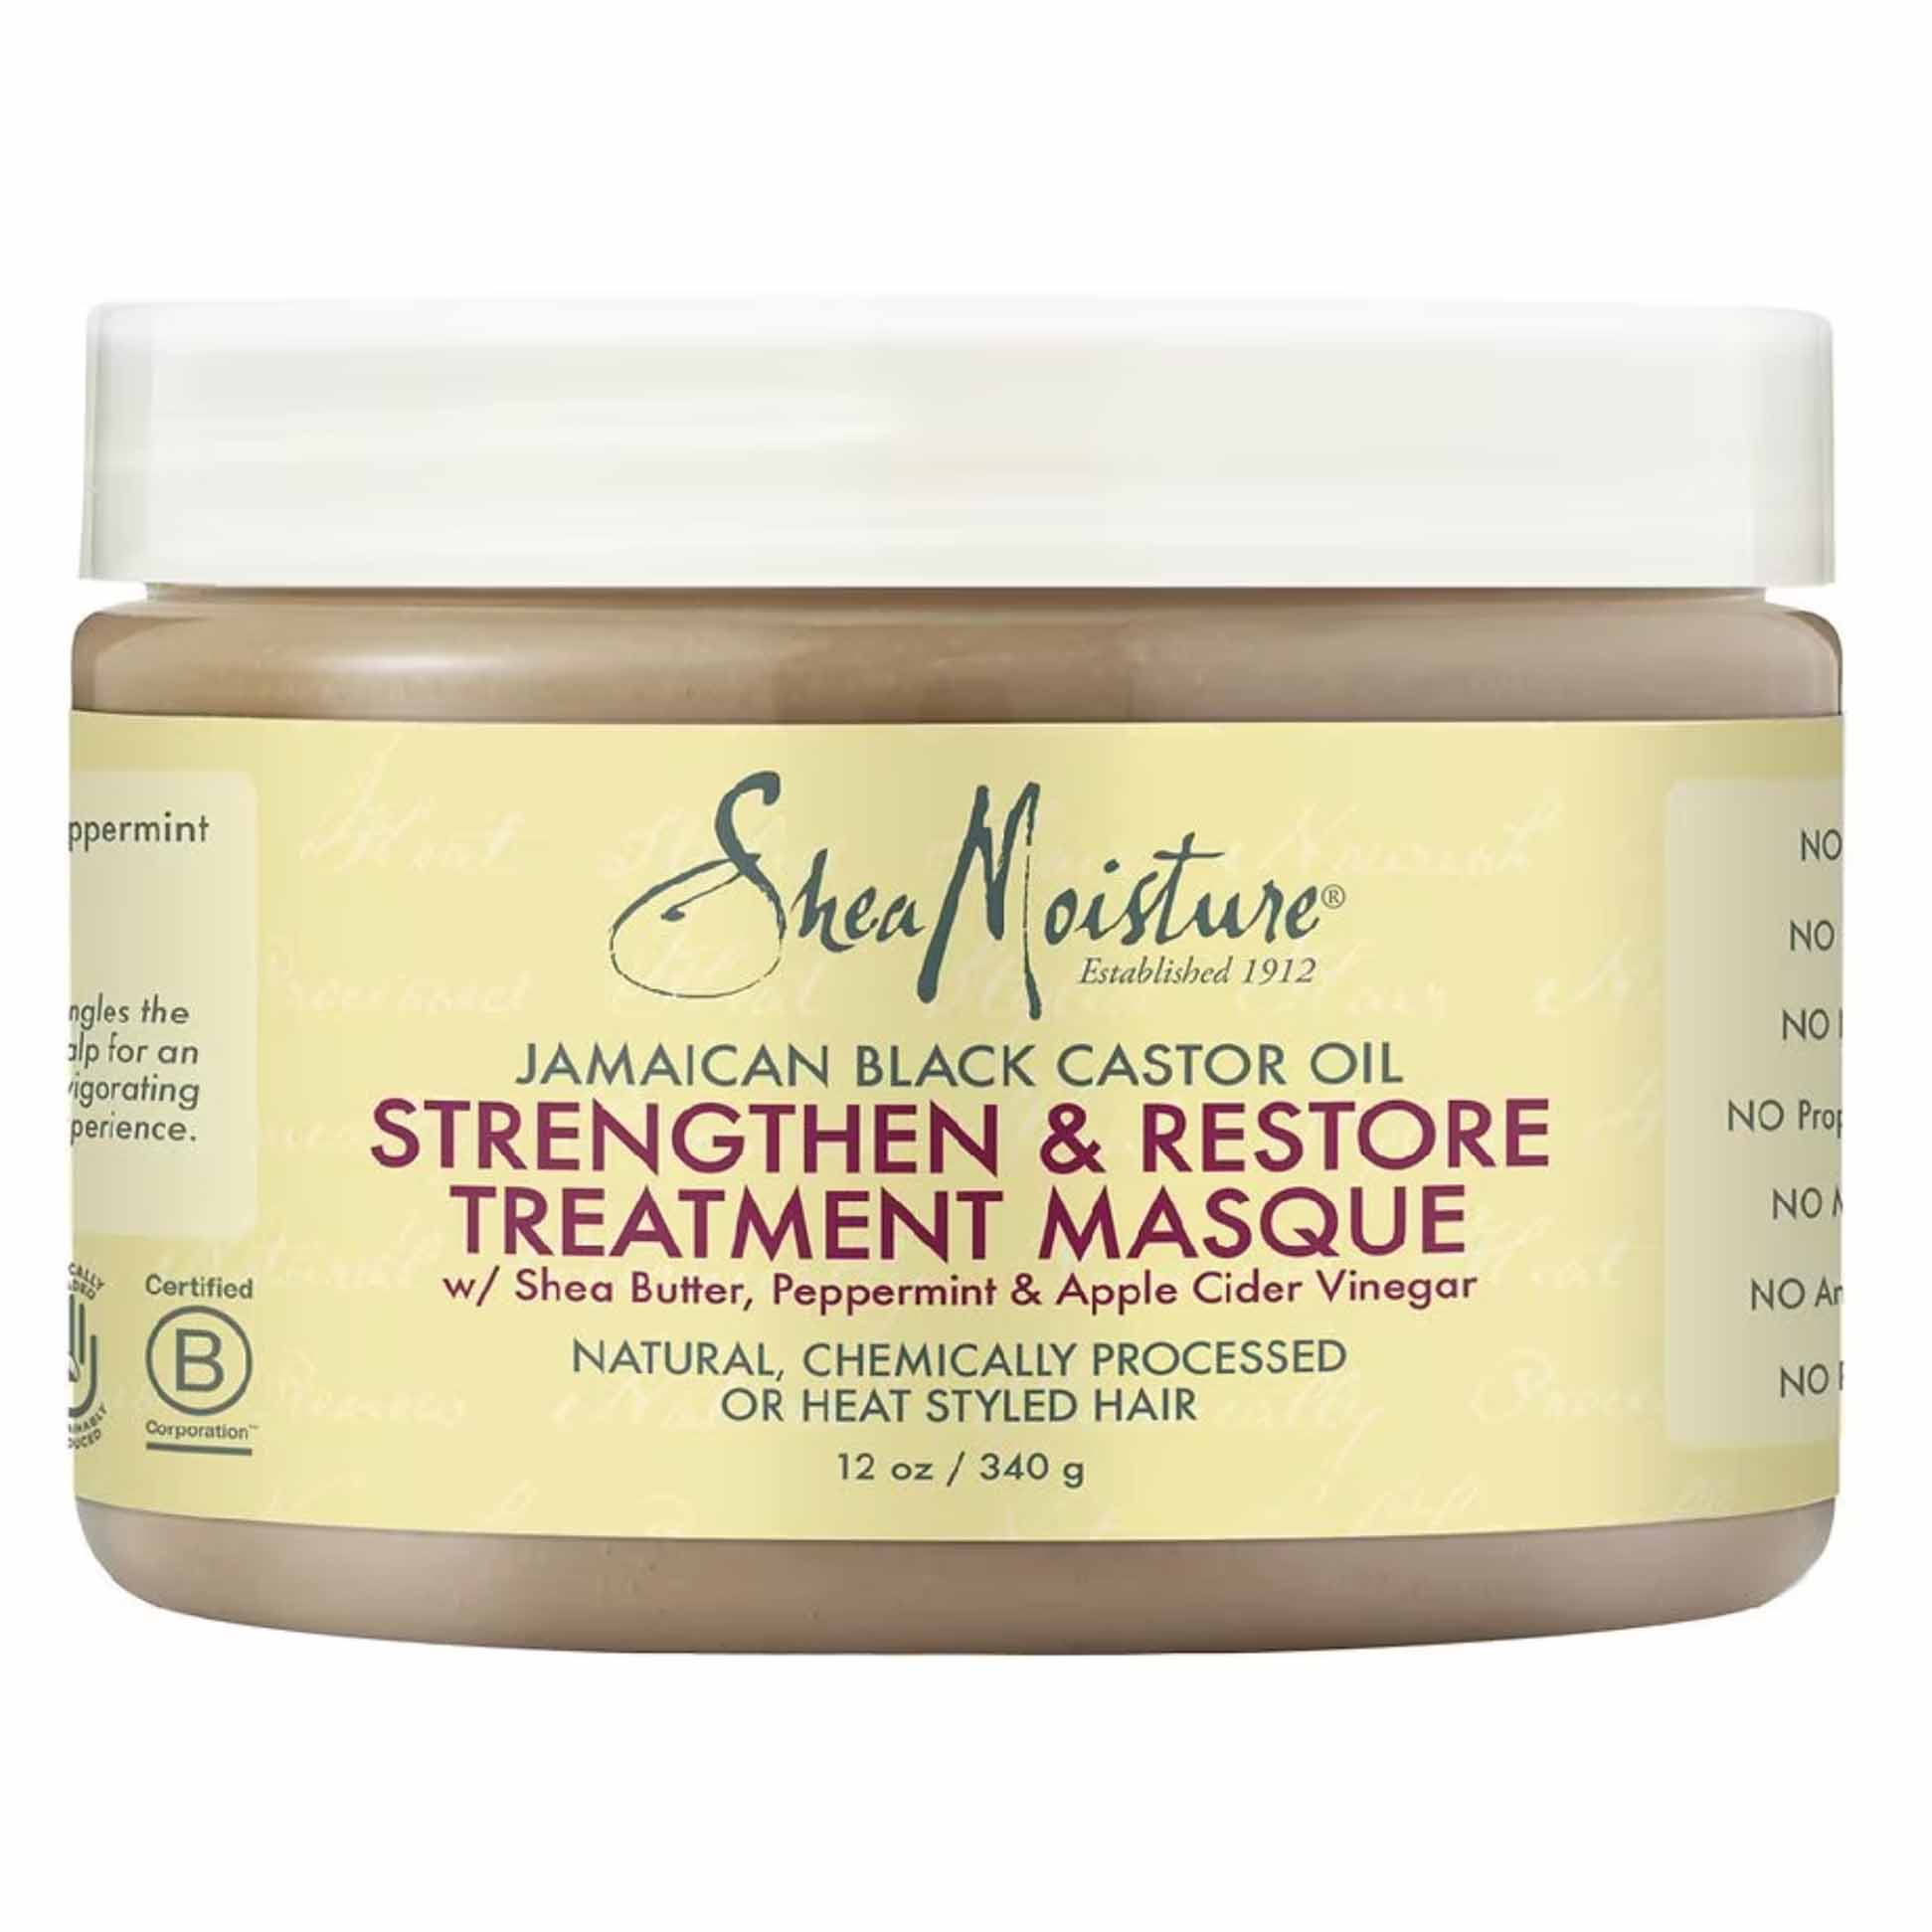 SheaMoisture Treatment Masque with black castor oil in white jar